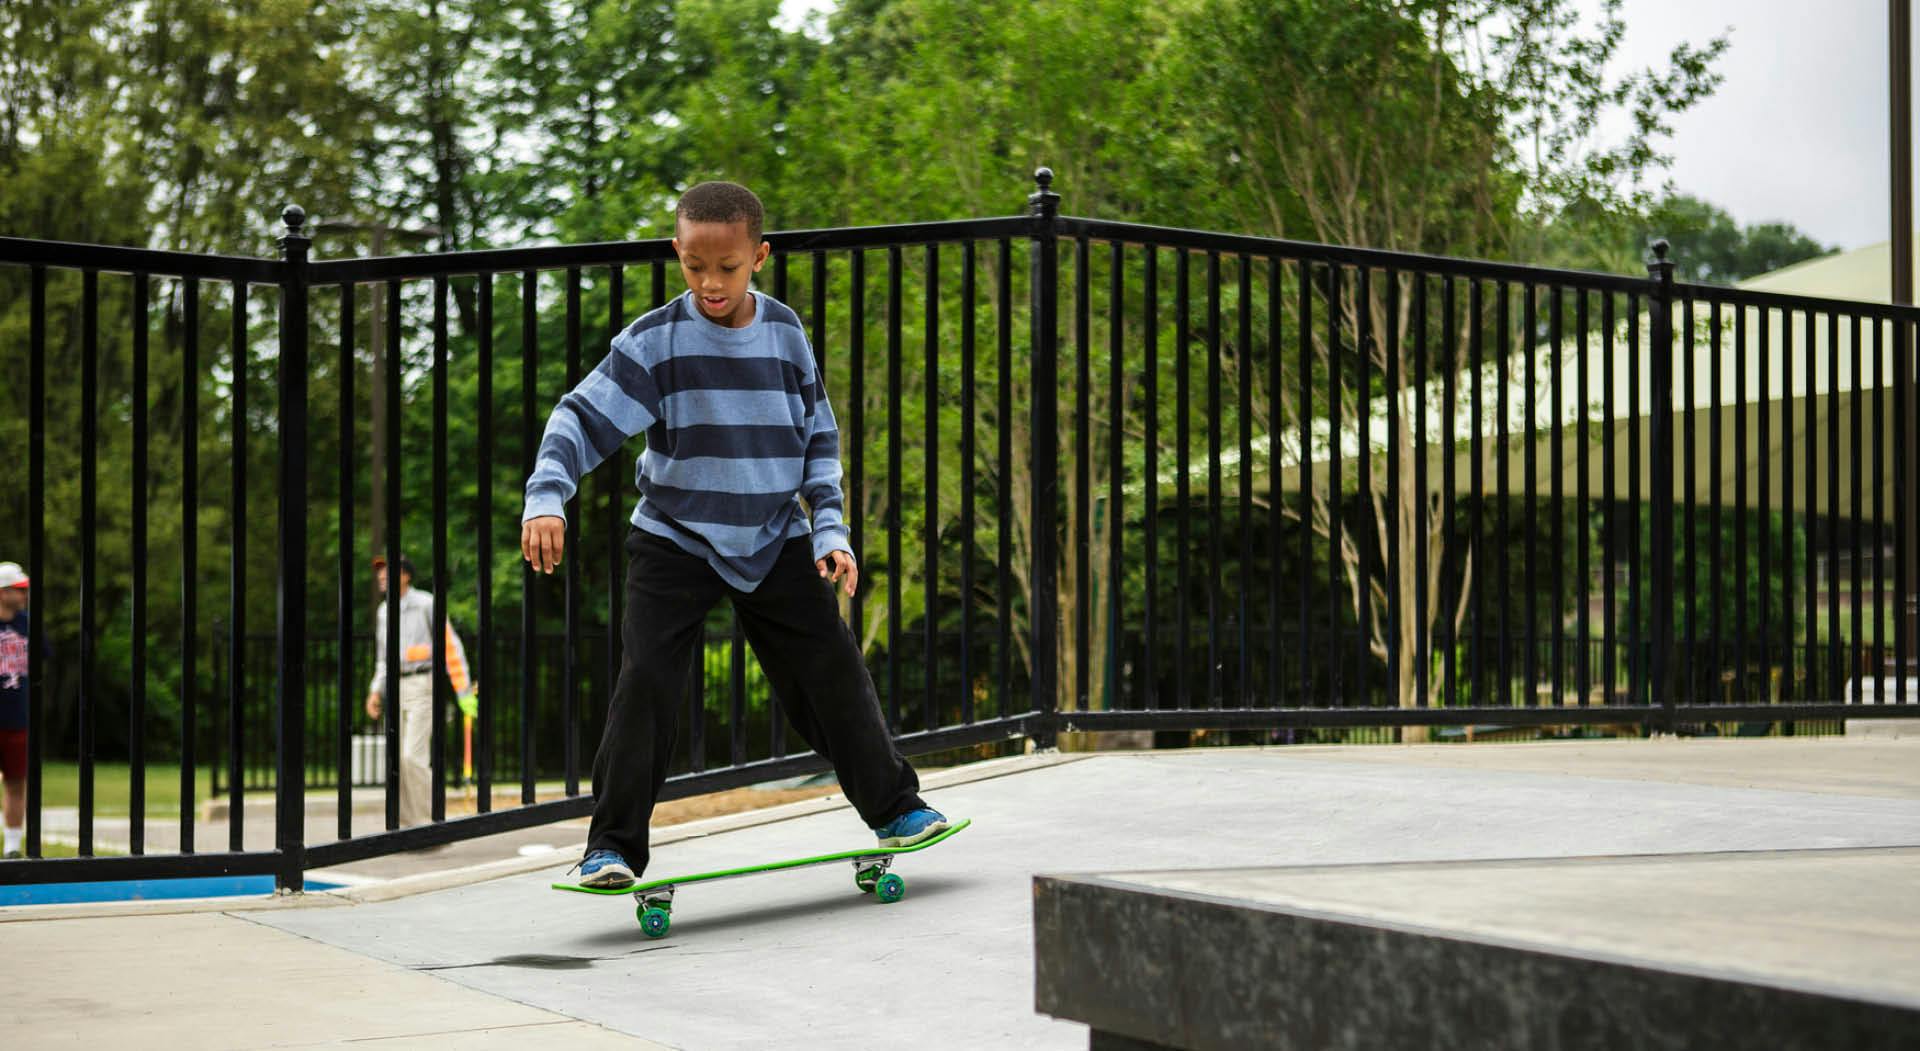 A young boy skateboards down a small ramp.